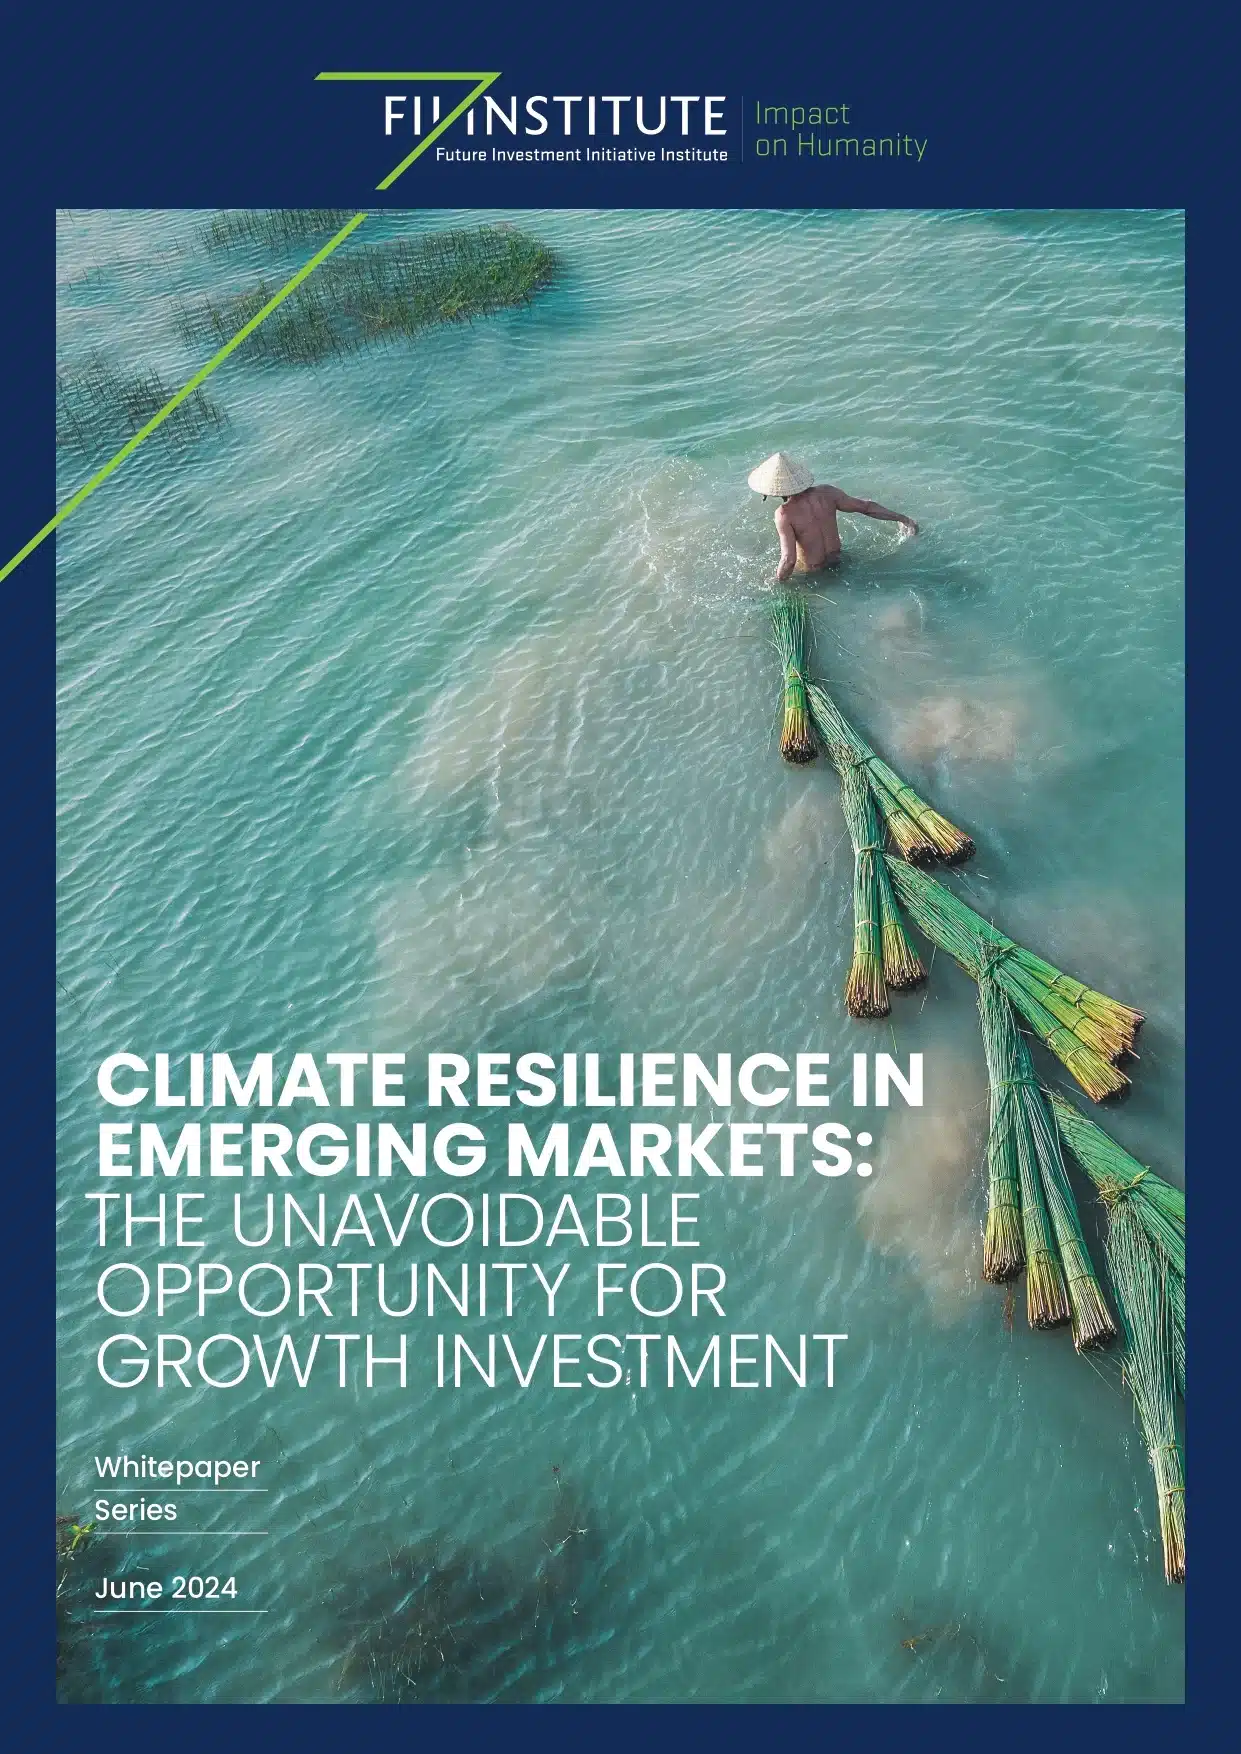 CLIMATE RESILIENCE IN EMERGING MARKETS: